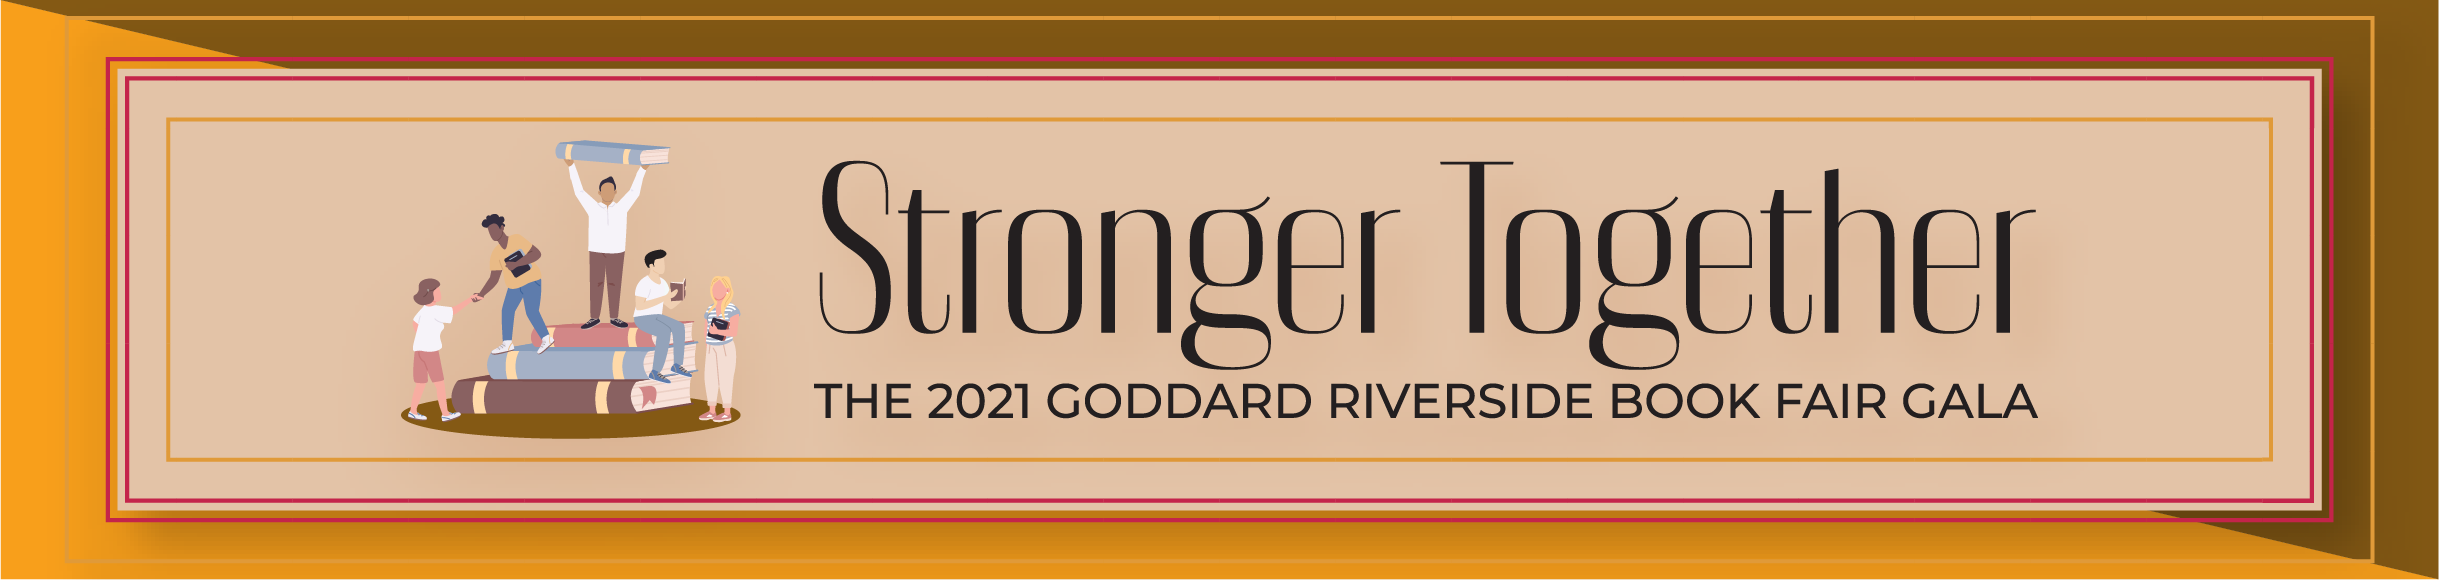 Logo of the Goddard Gala, showing an illustration of people working together, with the words Stronger Together: The 2021 Goddard Riverside Book Fair Gala